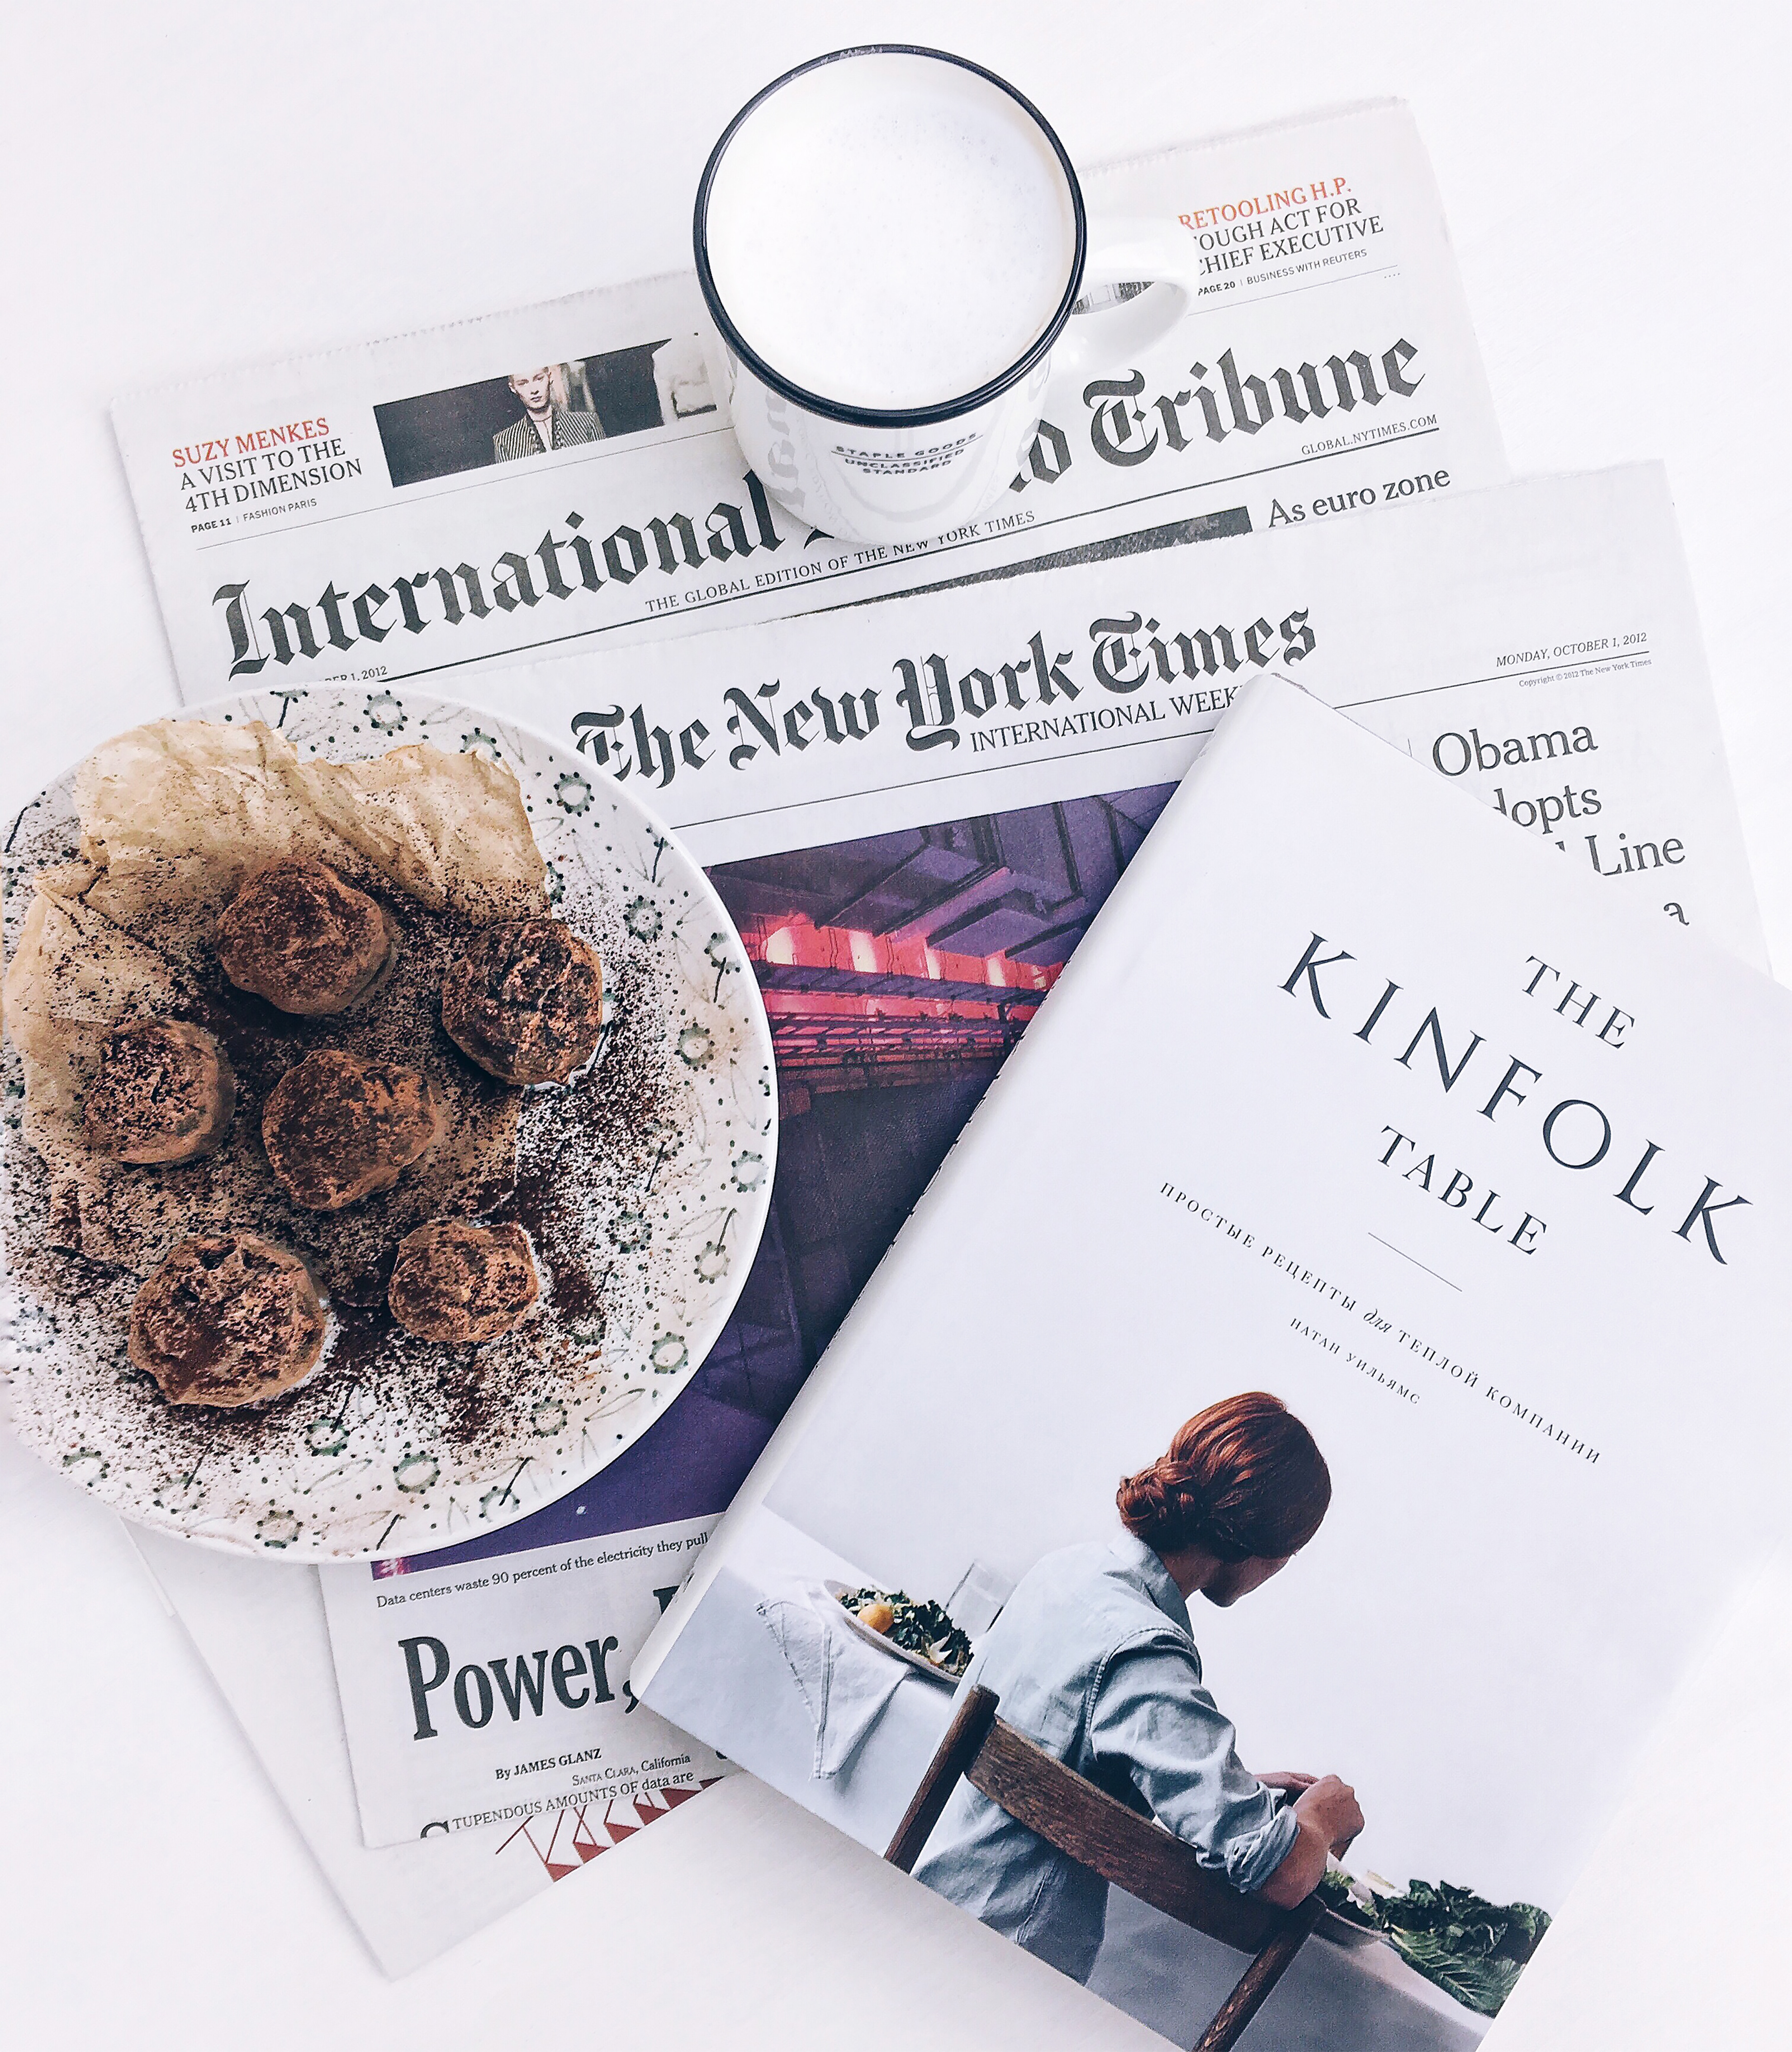 The kinfolk table book beside baked pastry on white ceramic plate with white ceramic mug photo